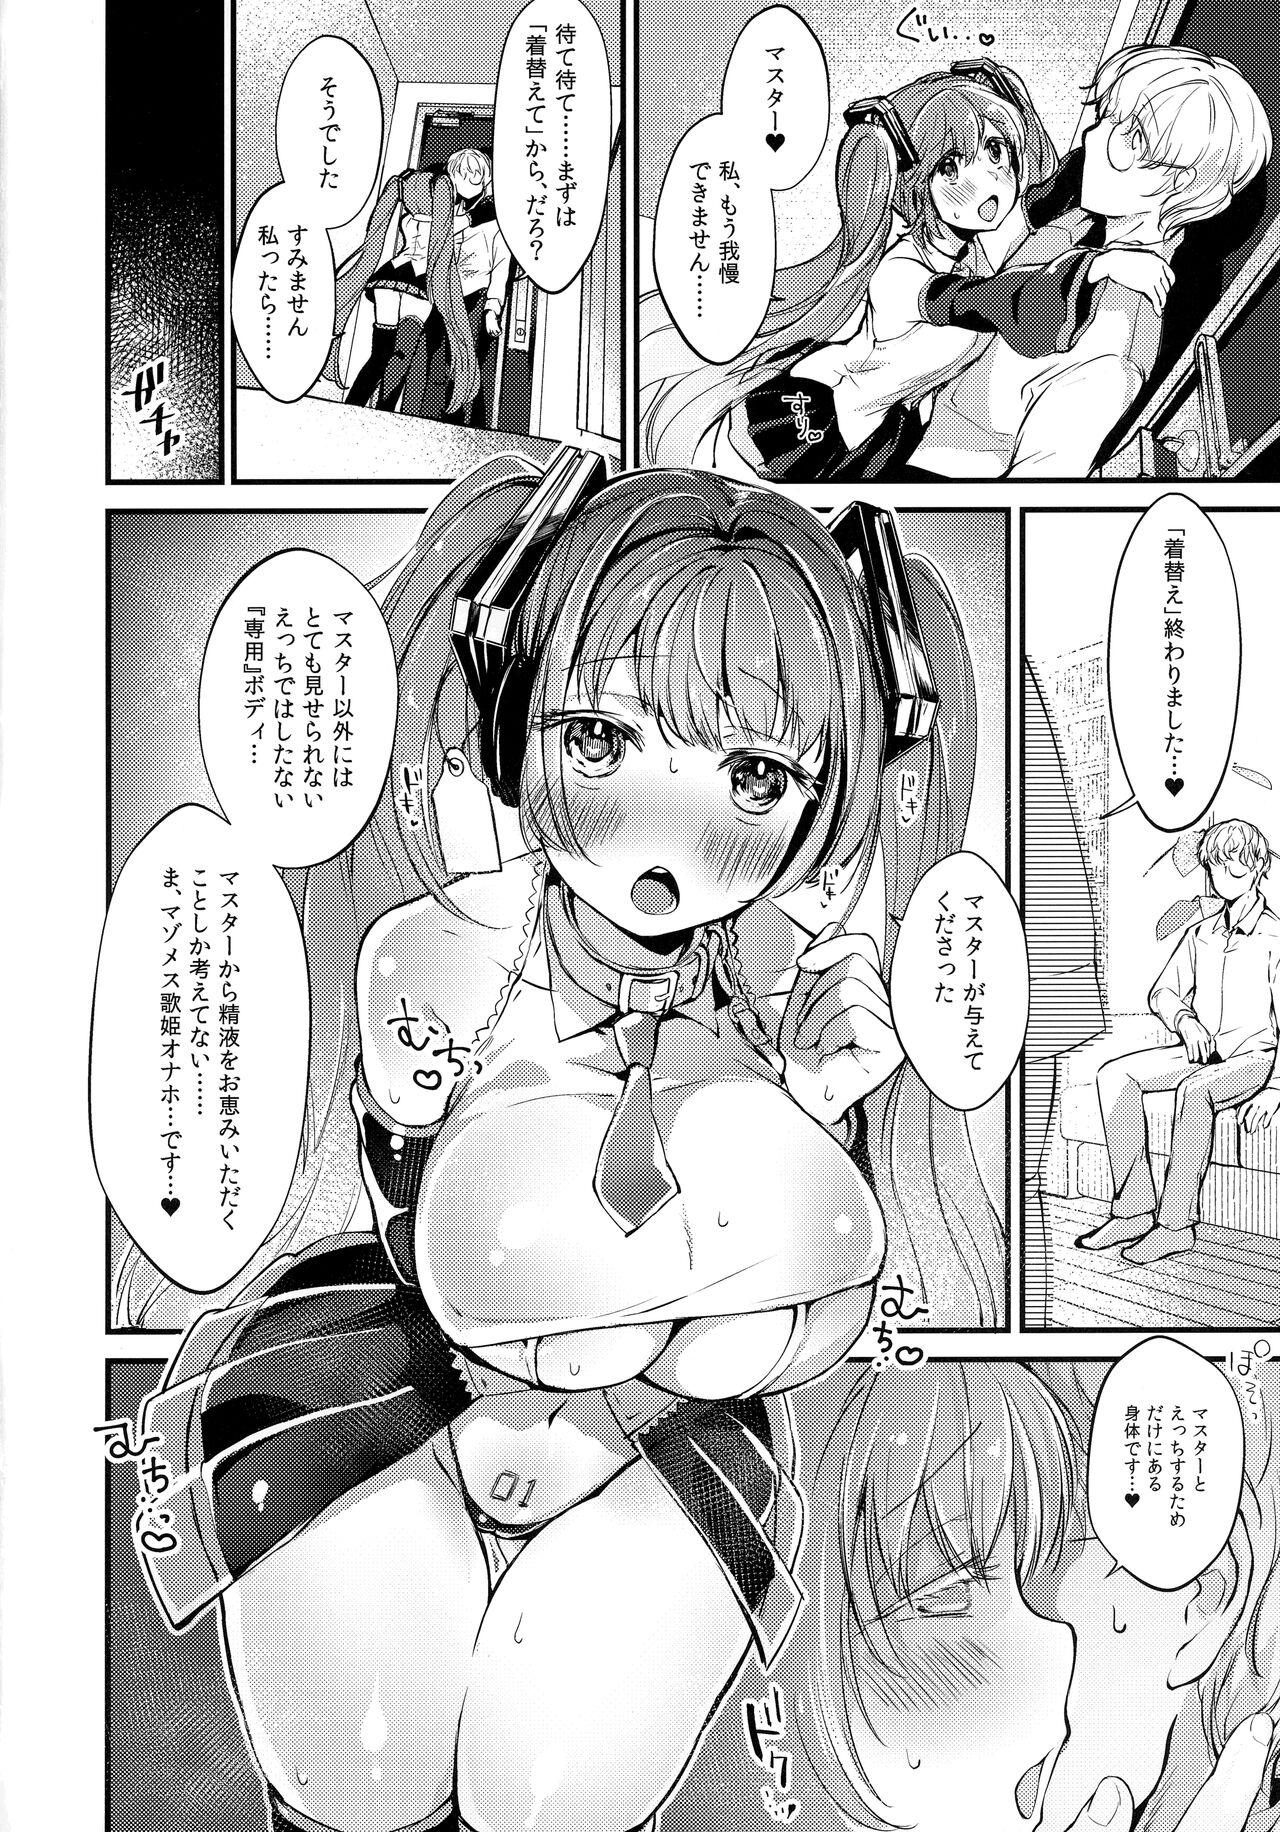 Erotic LOVEROID - Vocaloid Smooth - Page 7